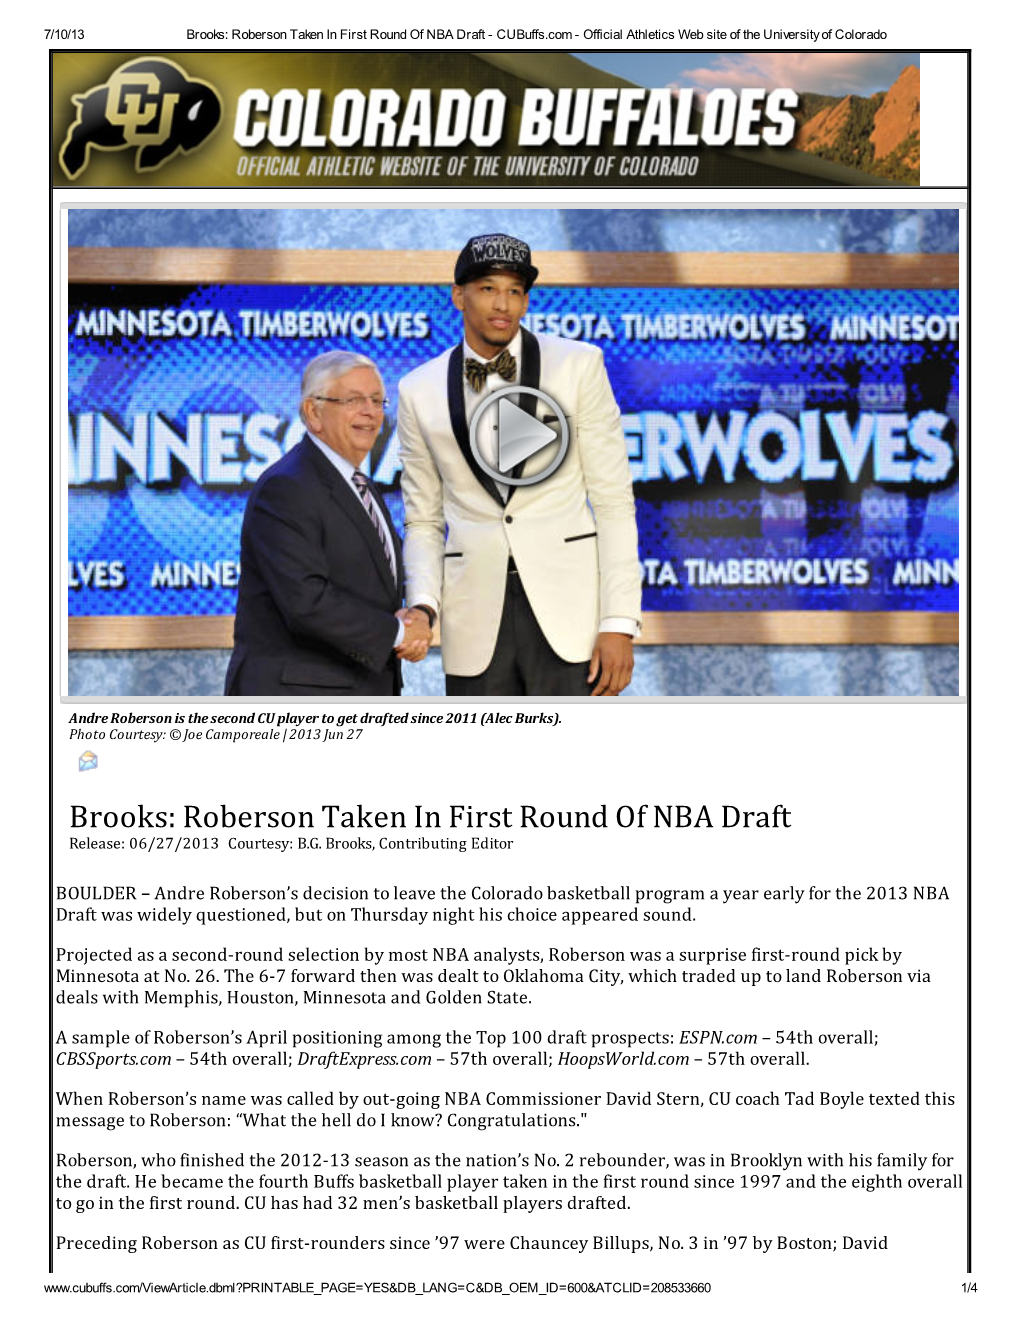 Brooks: Roberson Taken in First Round of NBA Draft - Cubuffs.Com - Official Athletics Web Site of the University of Colorado